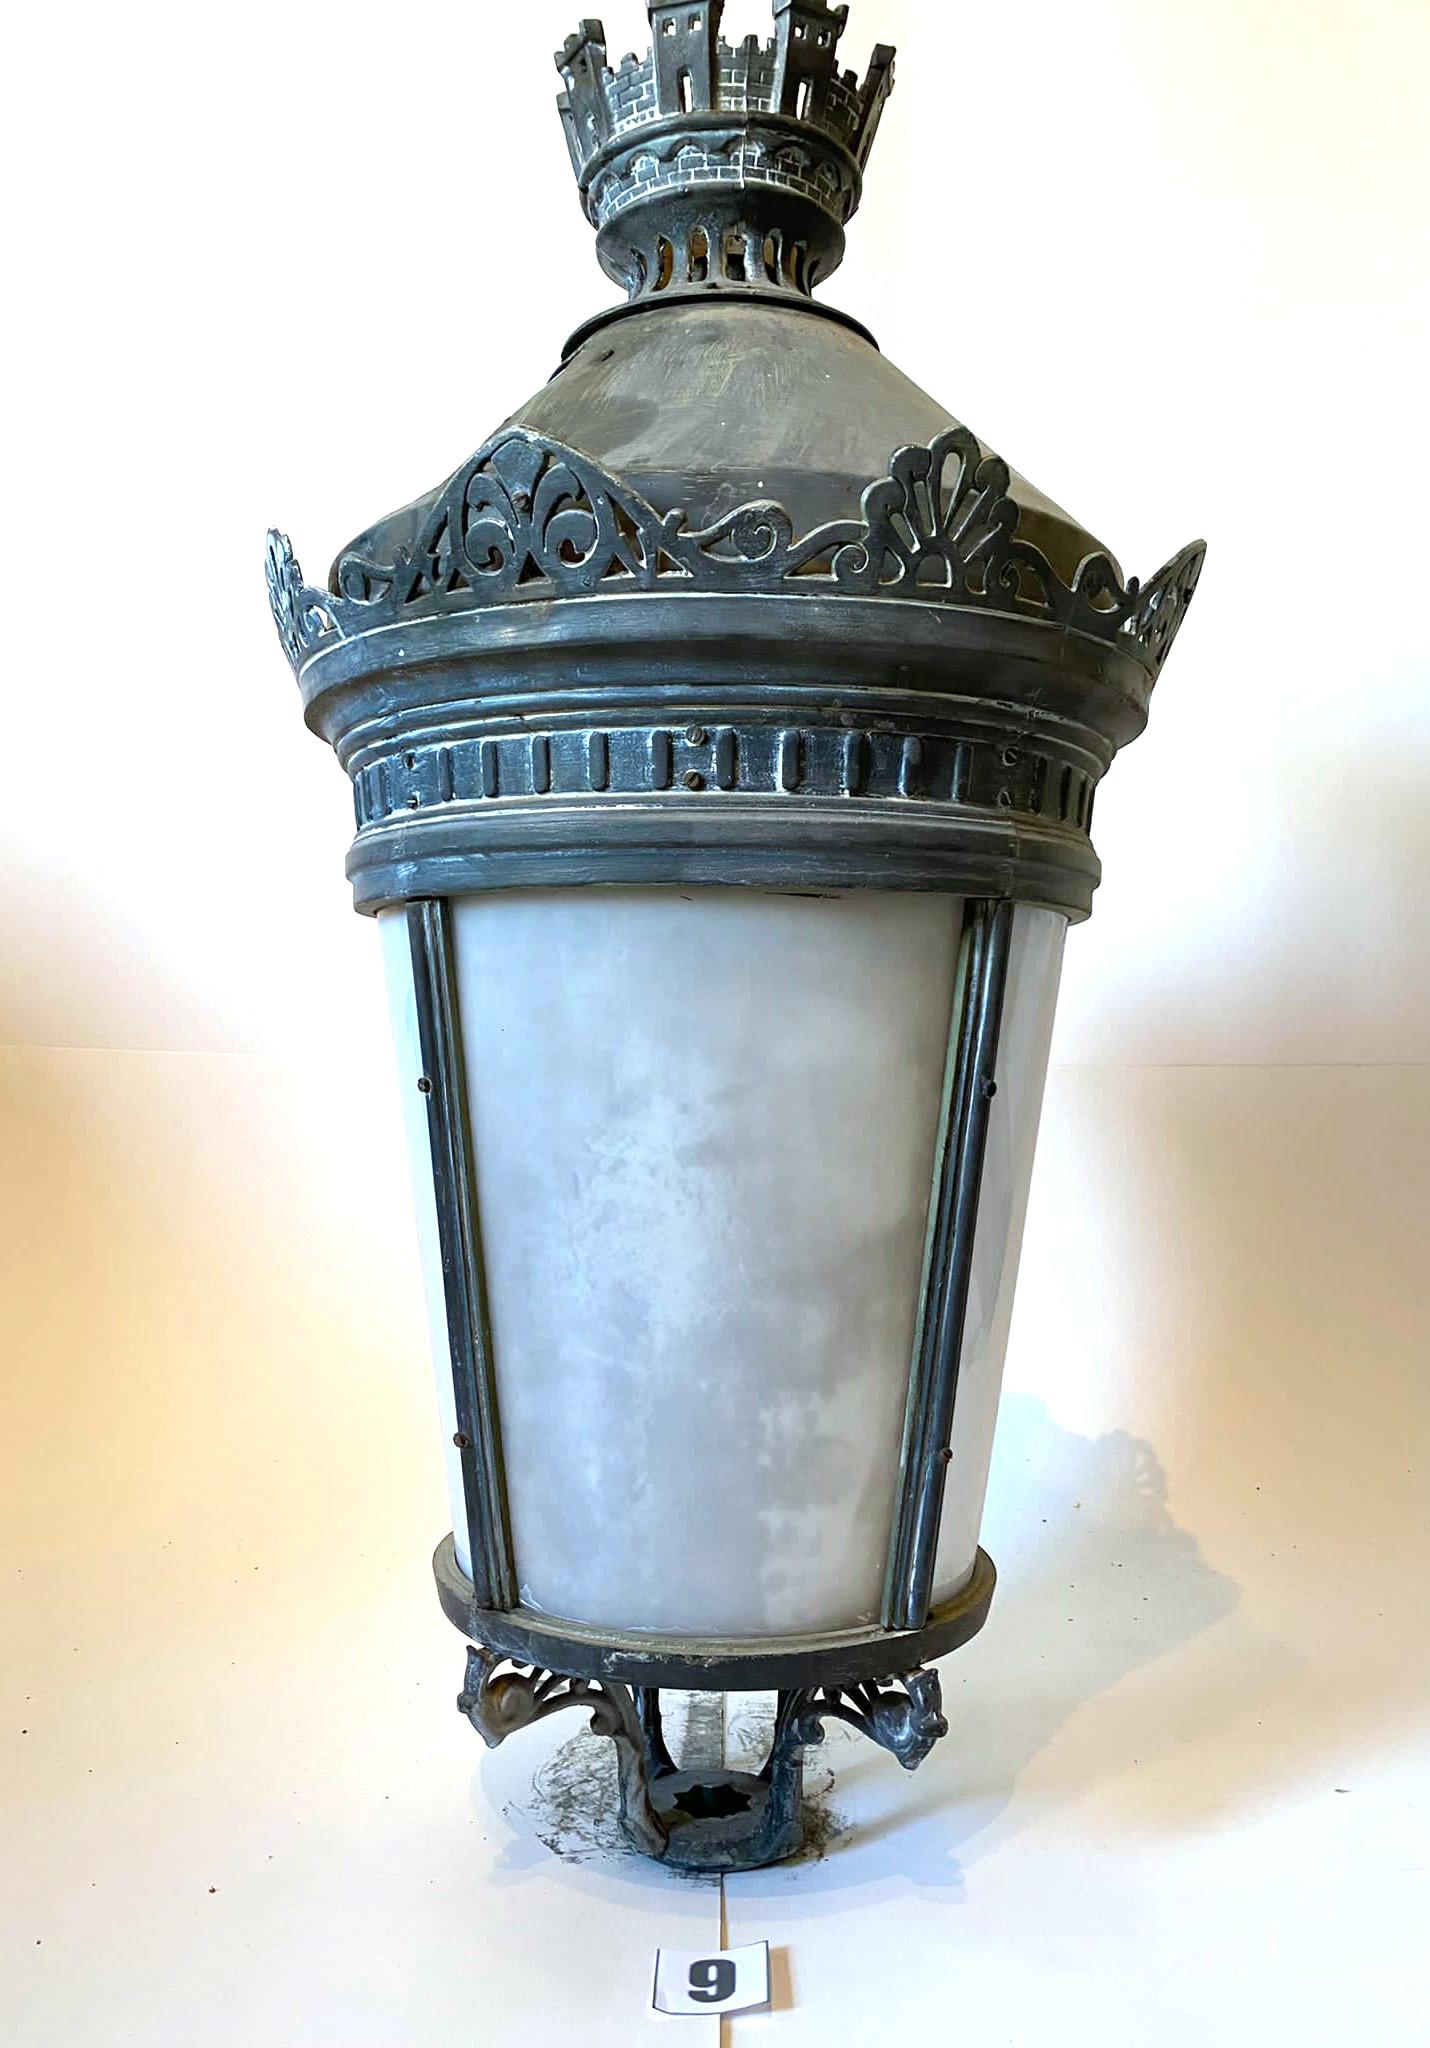 I'm offering a total of 29 Palatial Lanterns on my 1st Dibs store. 
 
****The Lantern pictured in this listing is LANTERN #9, and my restorer chose it as a single lantern that can be purchased by itself or combined with your choice of other